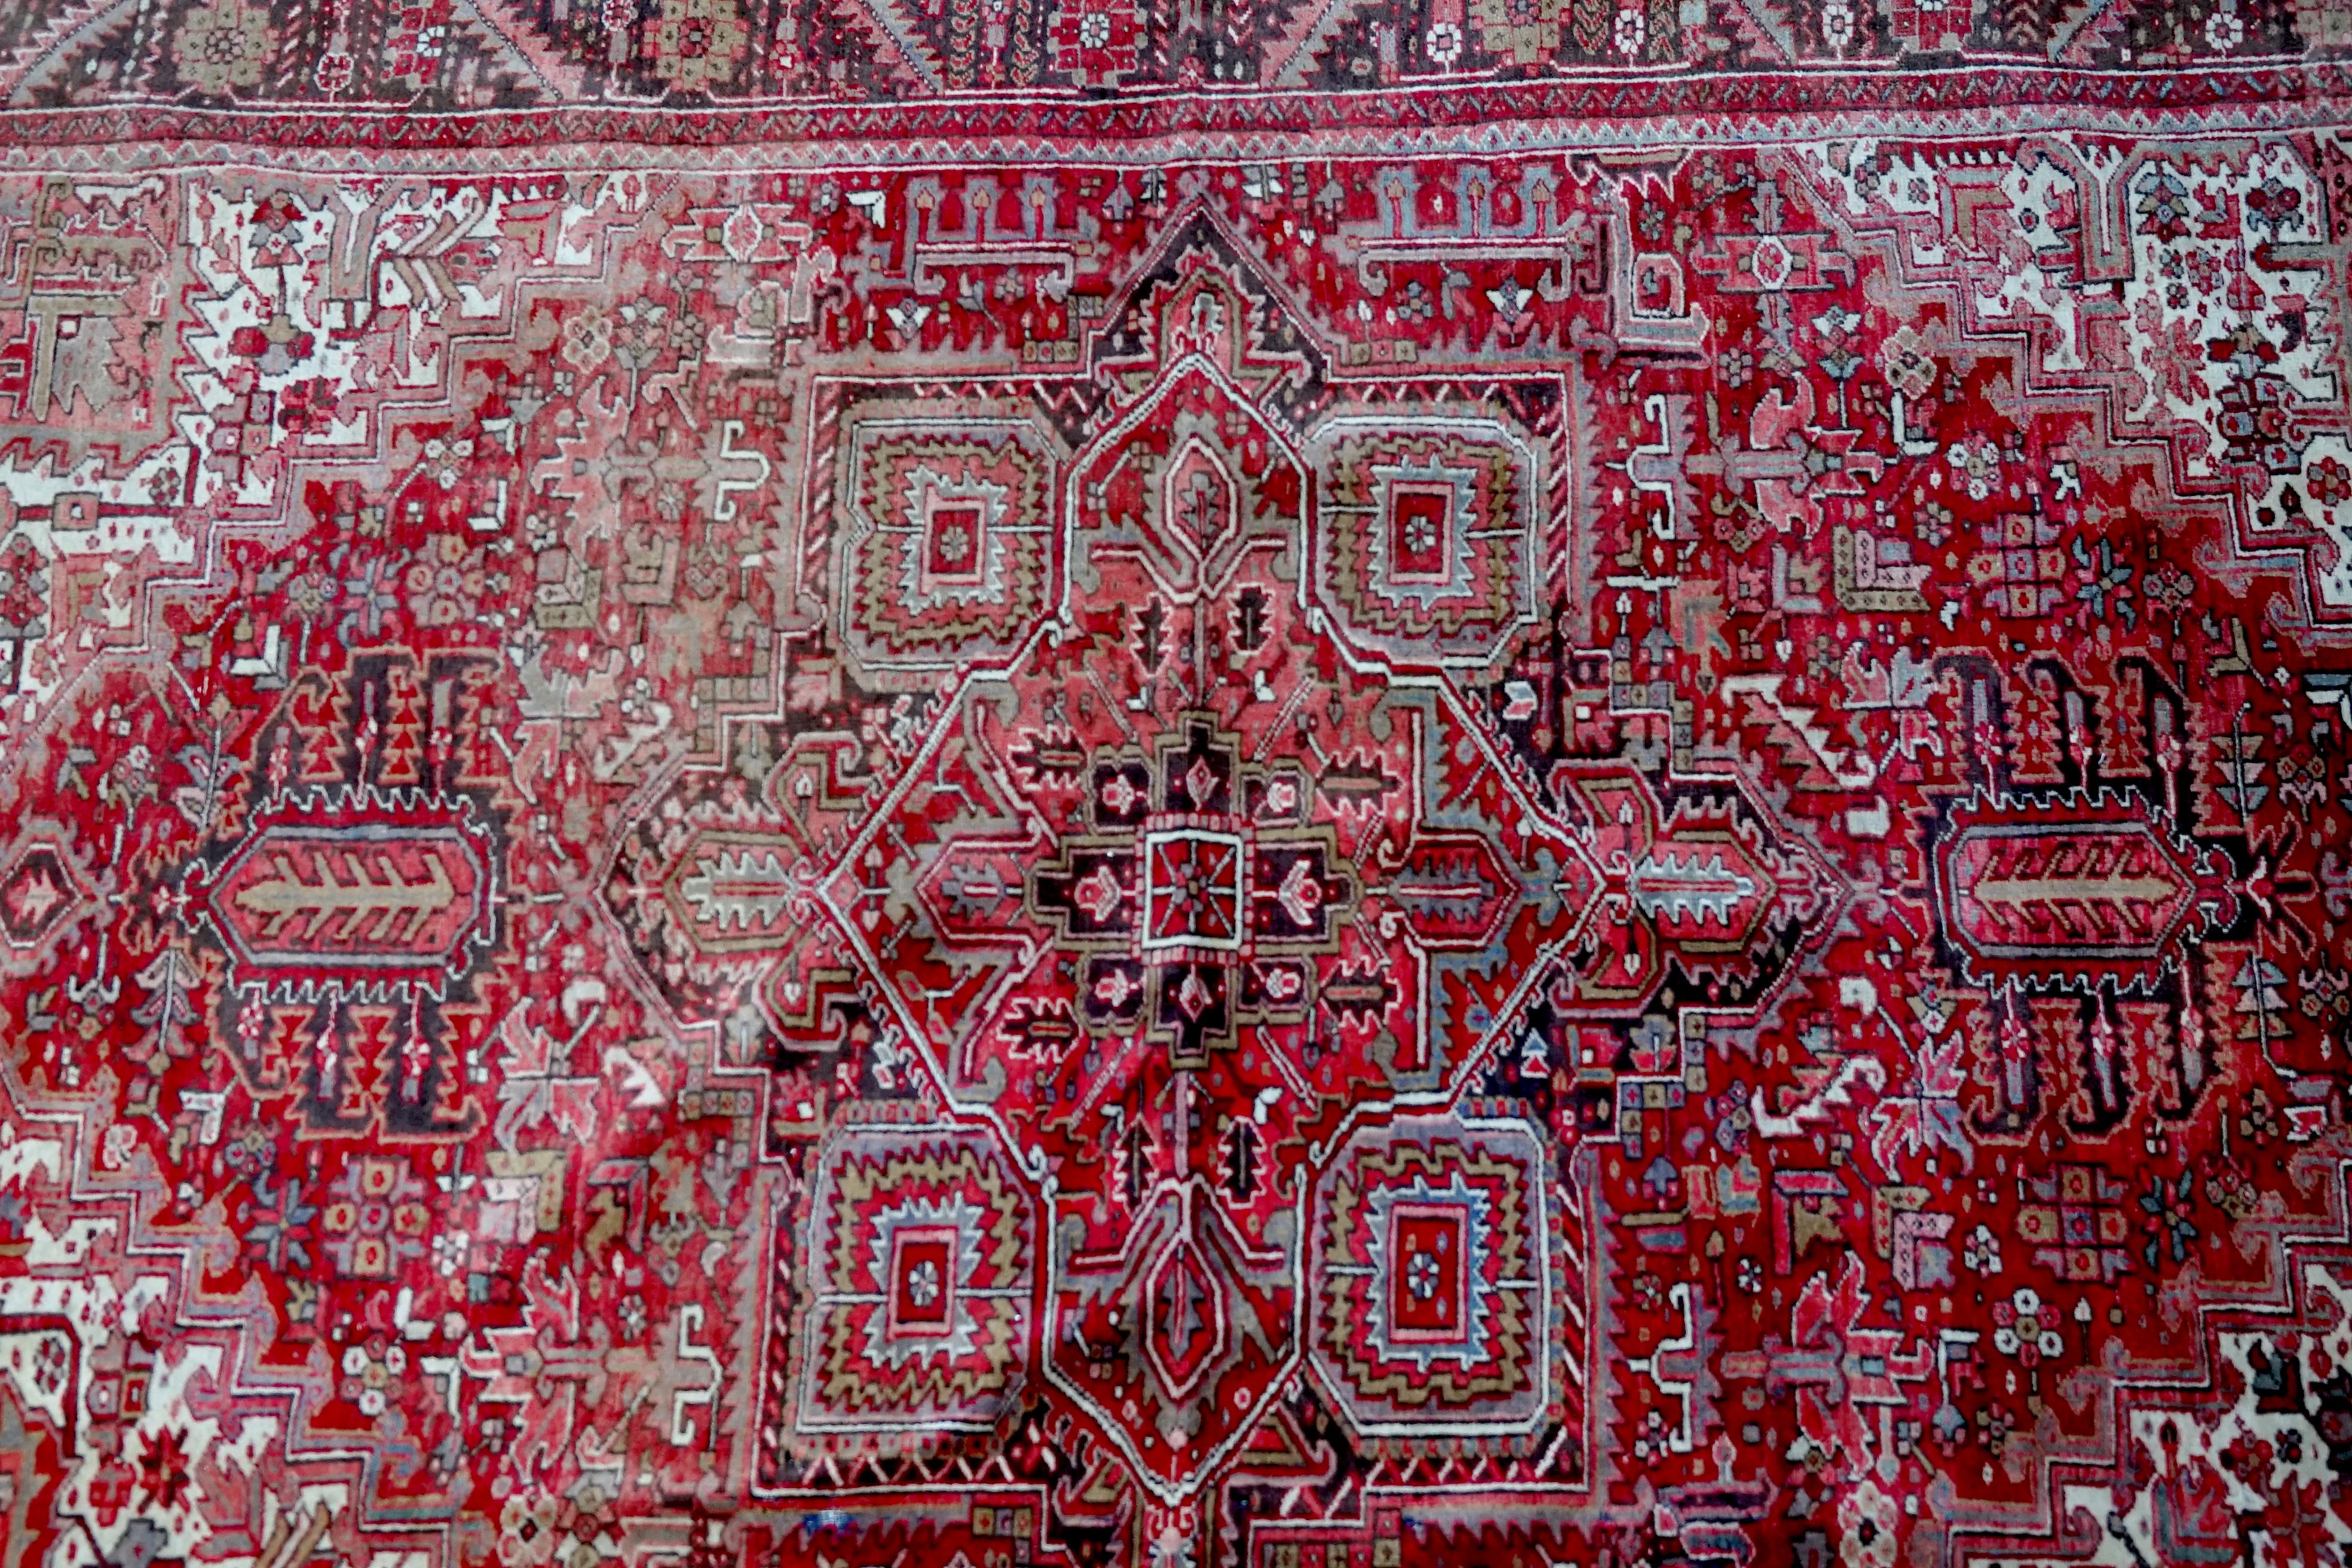 Rich reds, ivory and royal blues form the palette of colors for this 1950s Heriz Persian carpet to treasure. The red field features a large central pointed rectangular medallion linked to mirrored stepped pendants. Blue and ivory are normally added